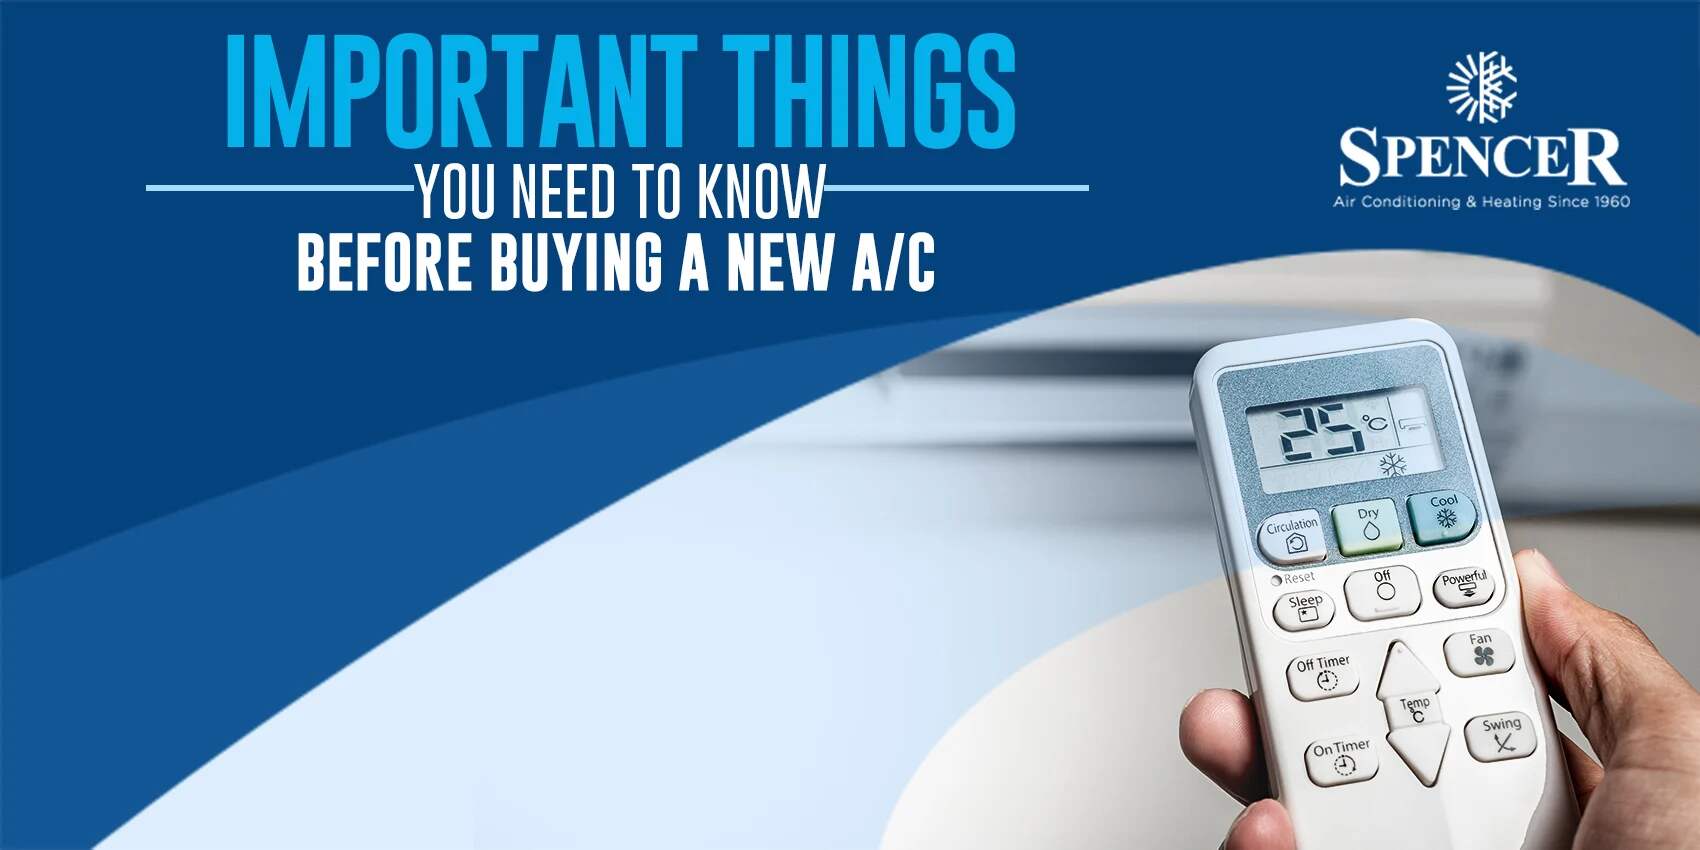 Important Things You Need to Know Before Buying a New A/C